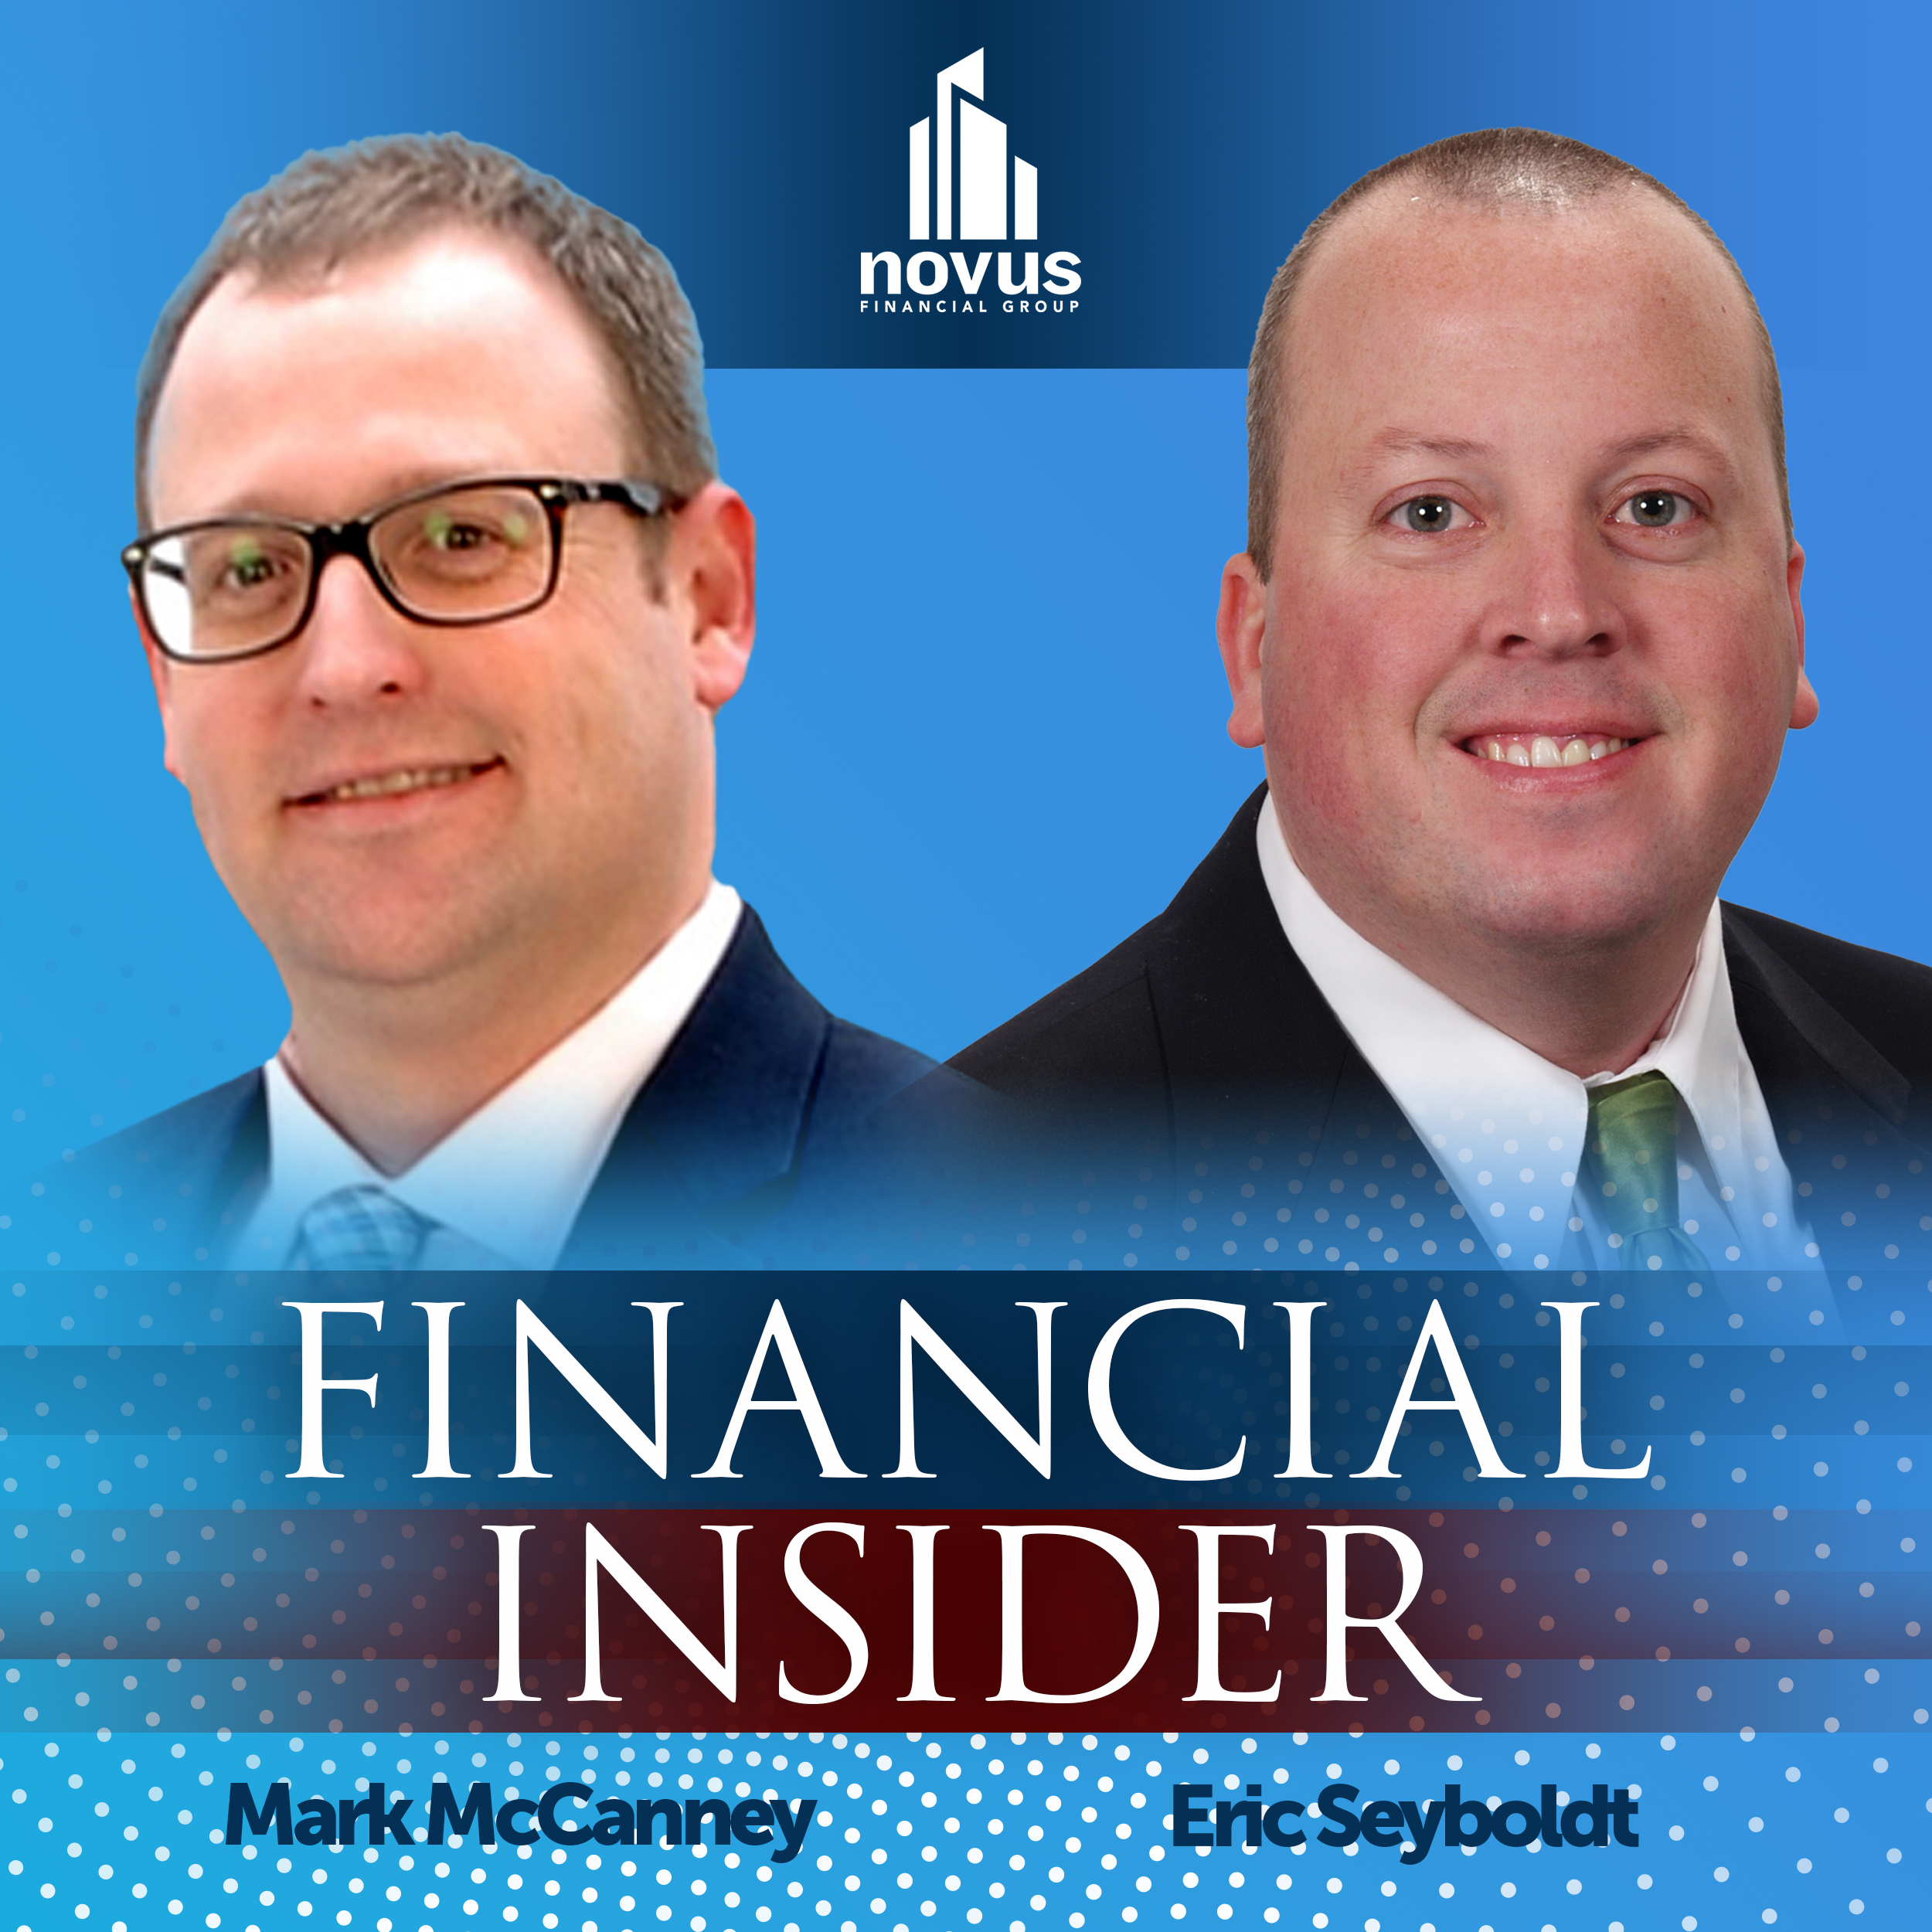 The Financial Insider